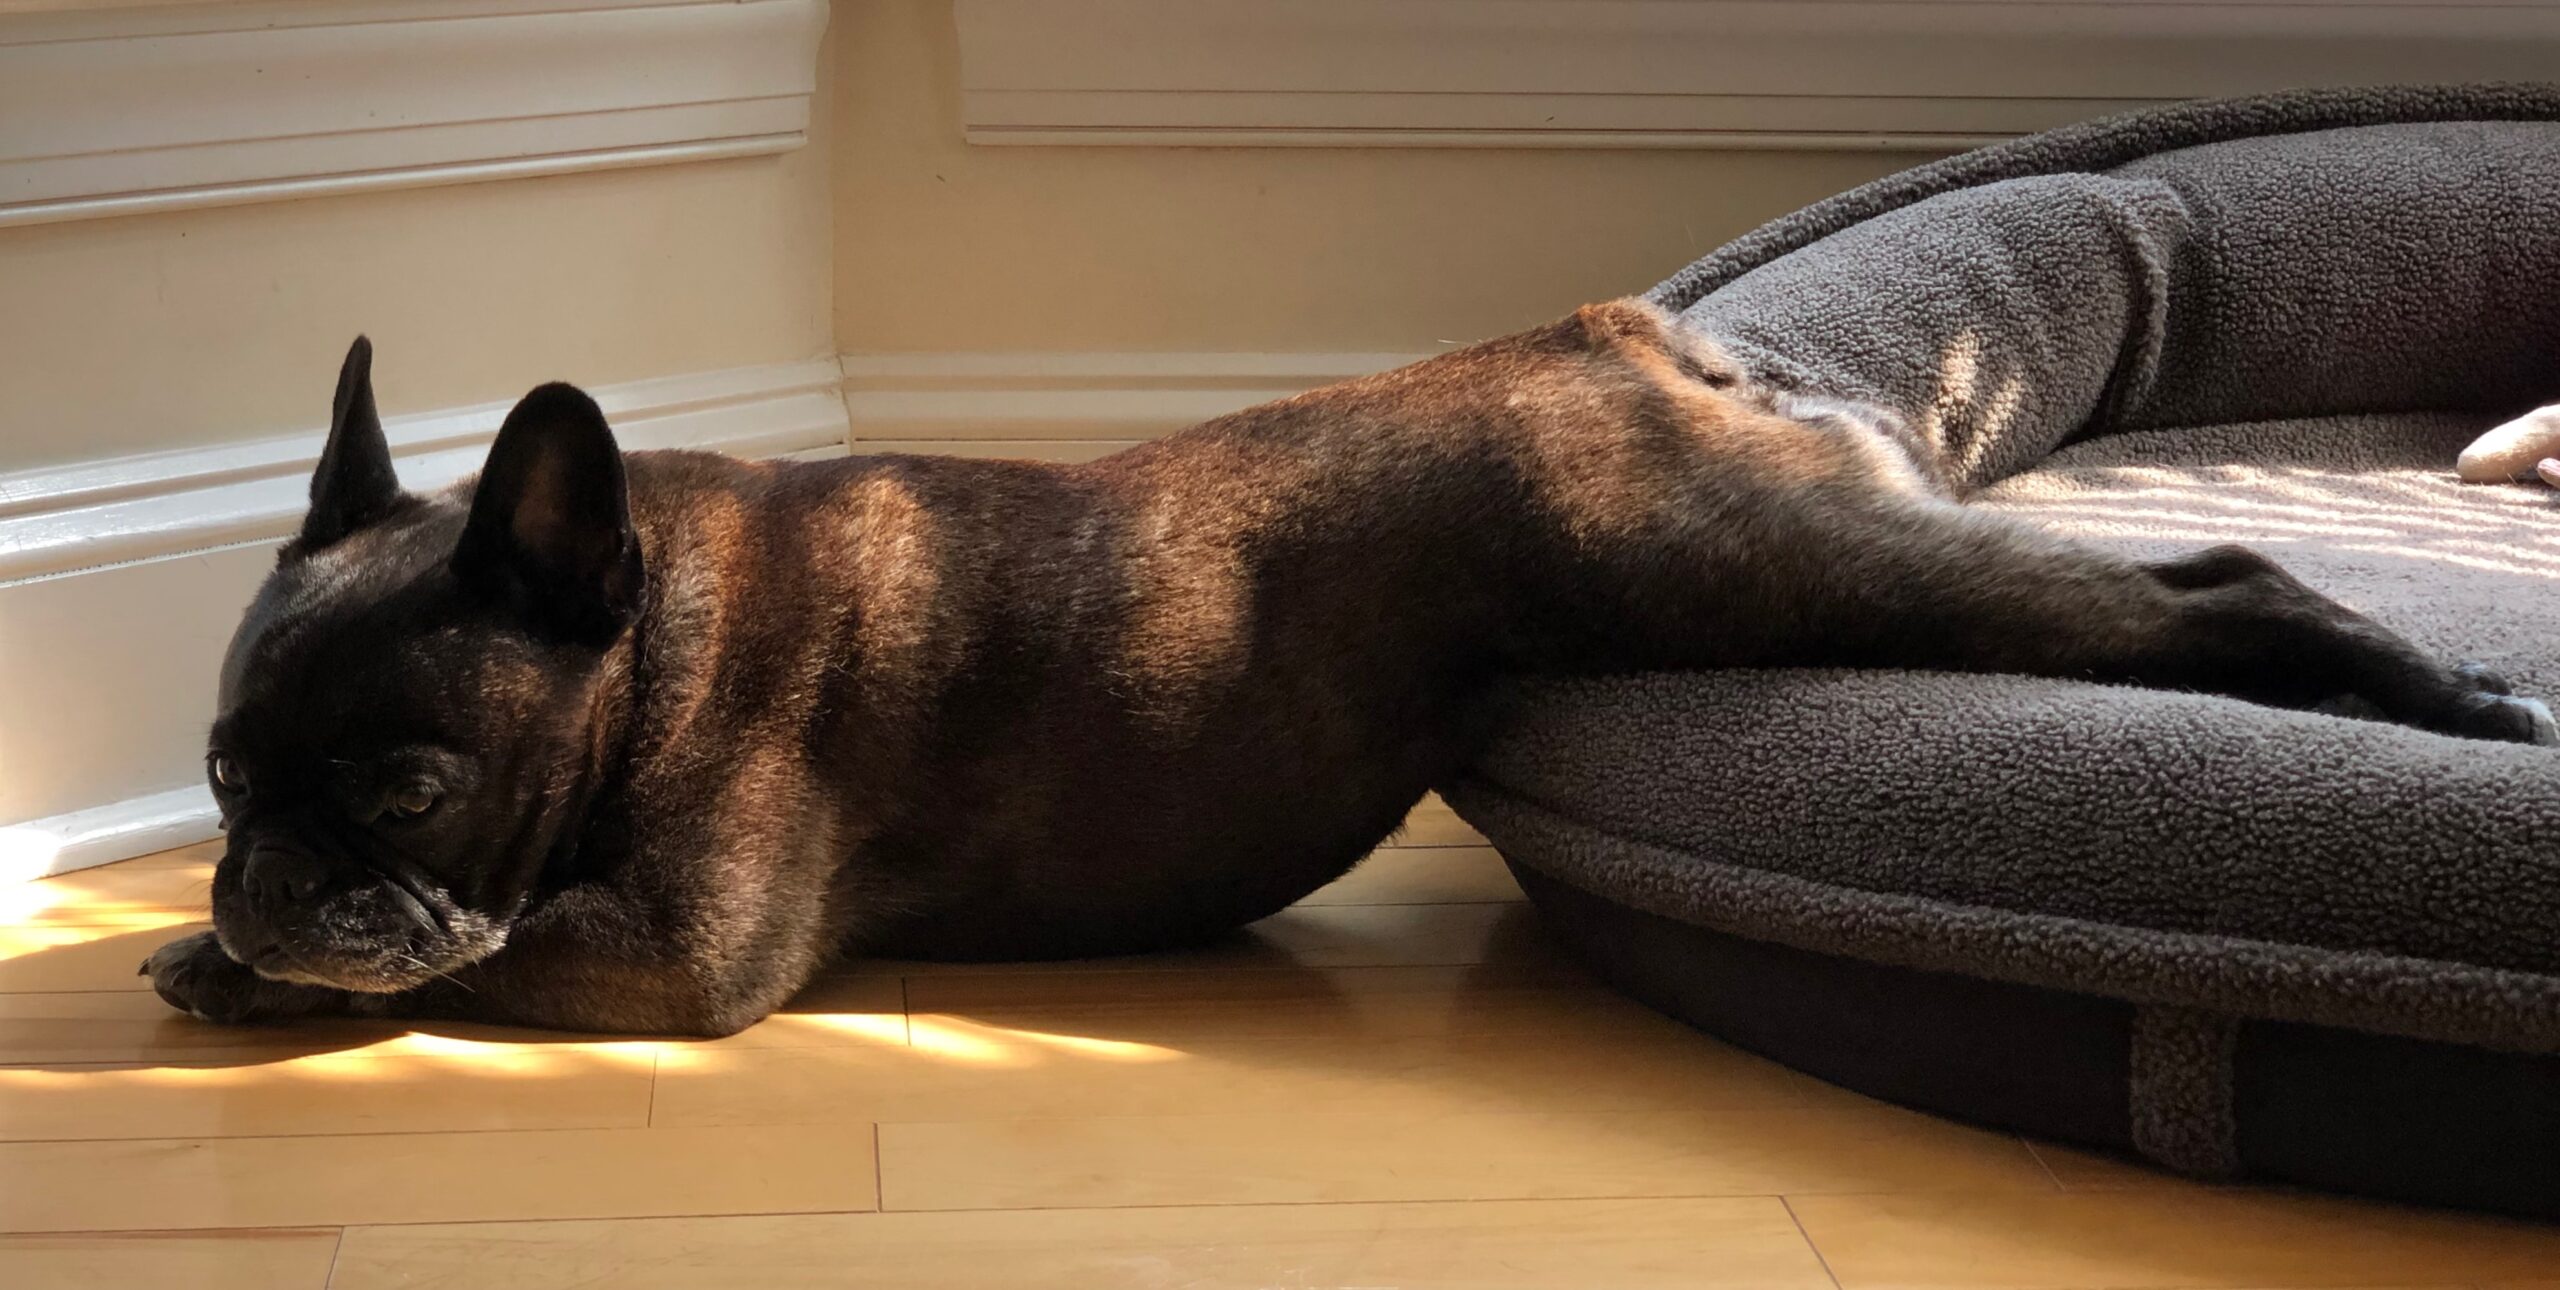 Black-brindle French Bulldog dozing in dappled sunlight.  Stretched to full length, hind quarters are propped up on fleece dog bed, rest of body draped across wooden floor.  Chin resting on paws, eyelids half-closed.